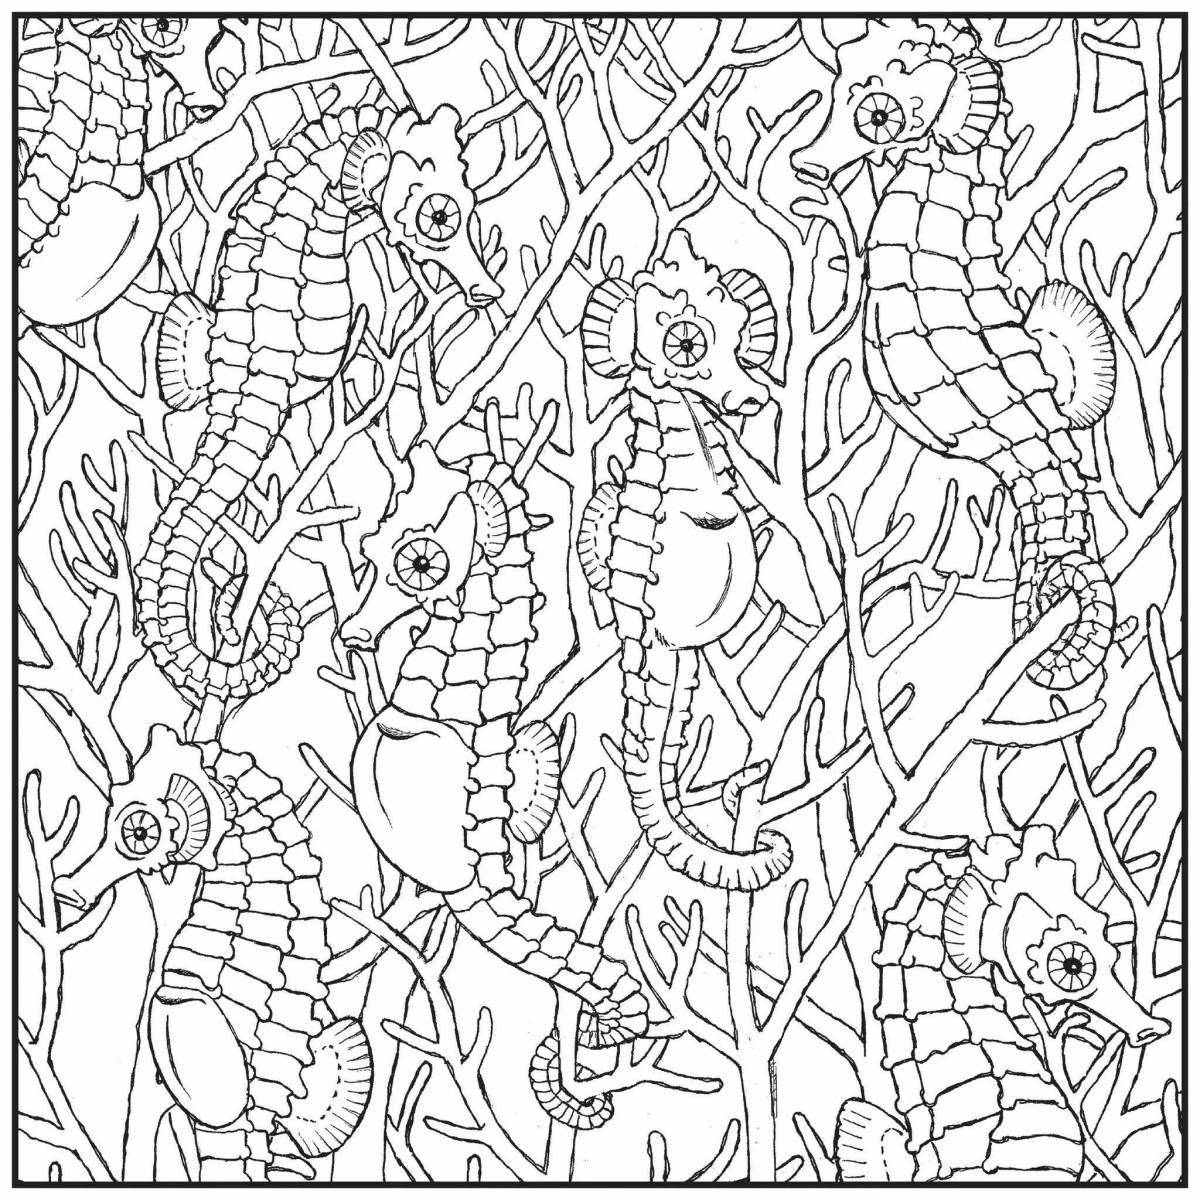 Relaxing coloring by numbers for adults en antistress